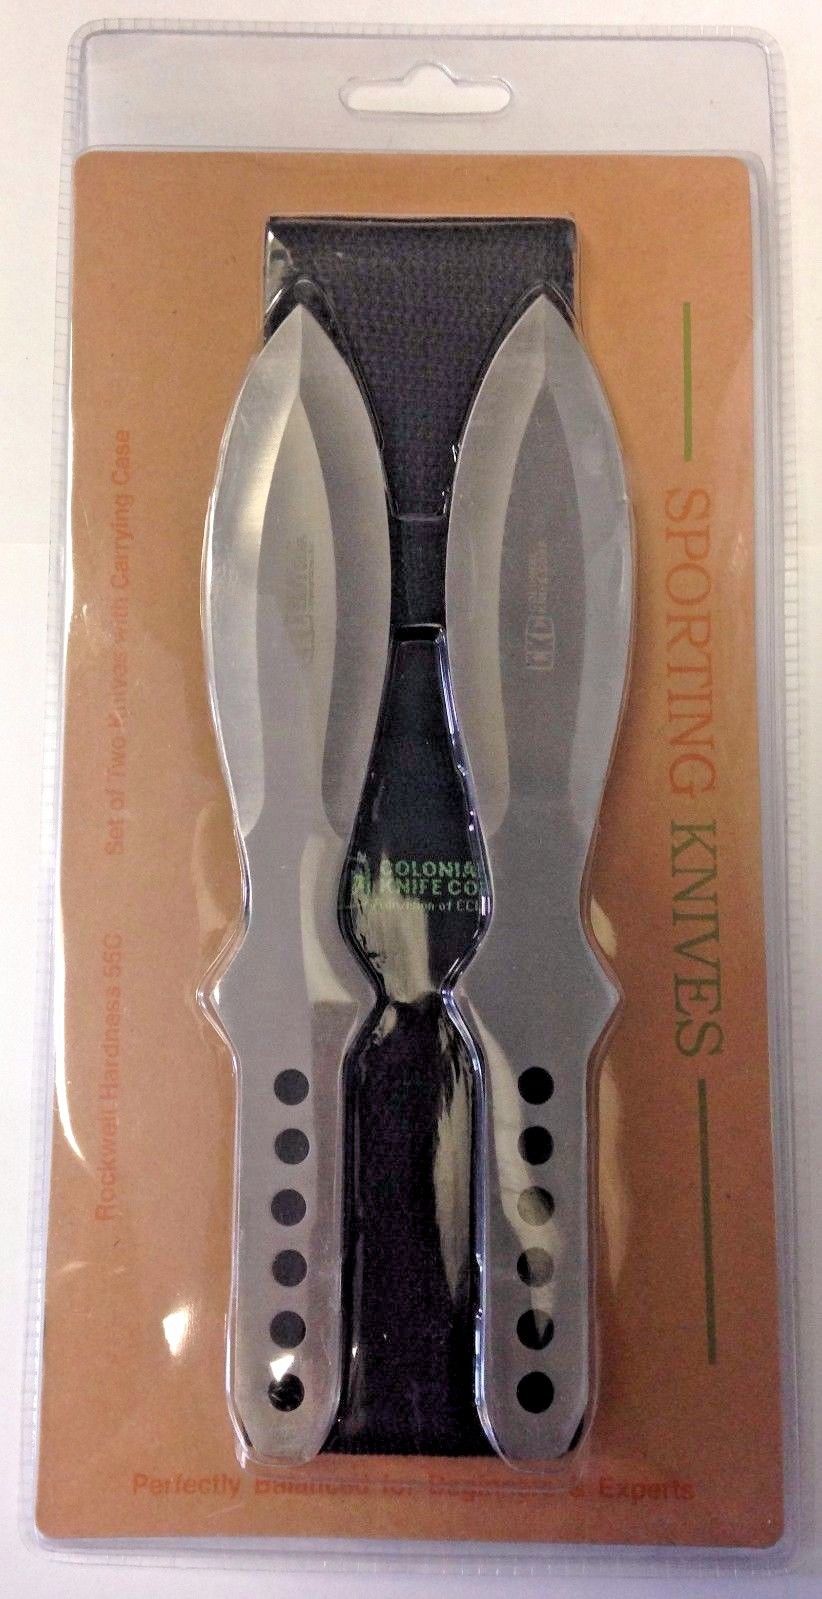 CKC 1081058 Colonial Knife Throwing Knives 1 Pair Silver Packaged